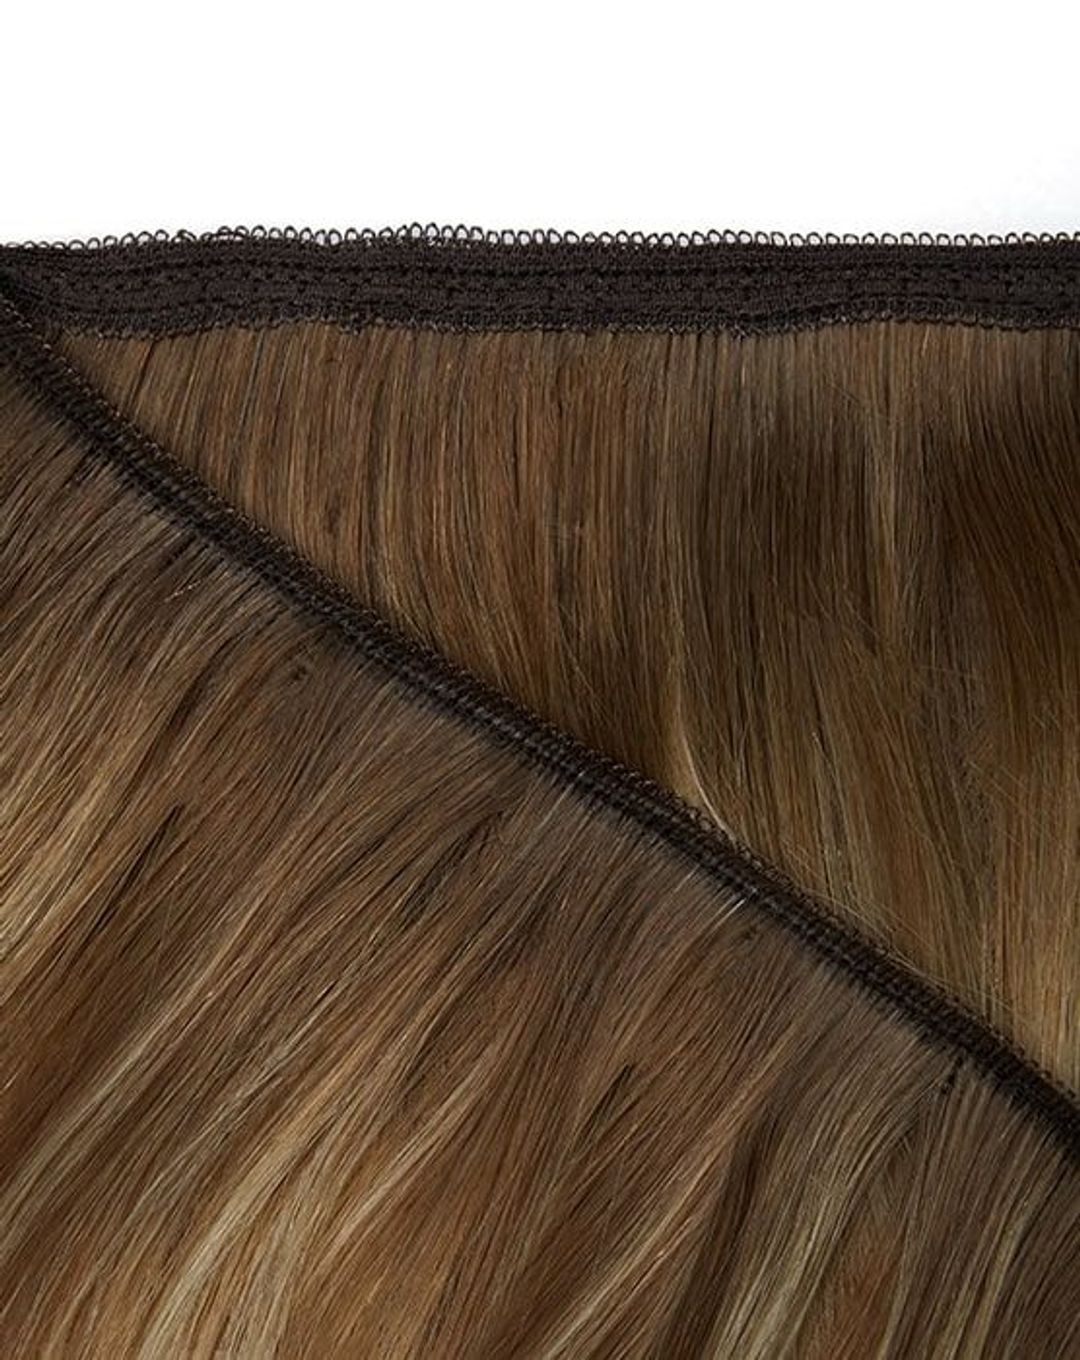 Beauty Works Gold Double Weft Extensions - Ebony,24"